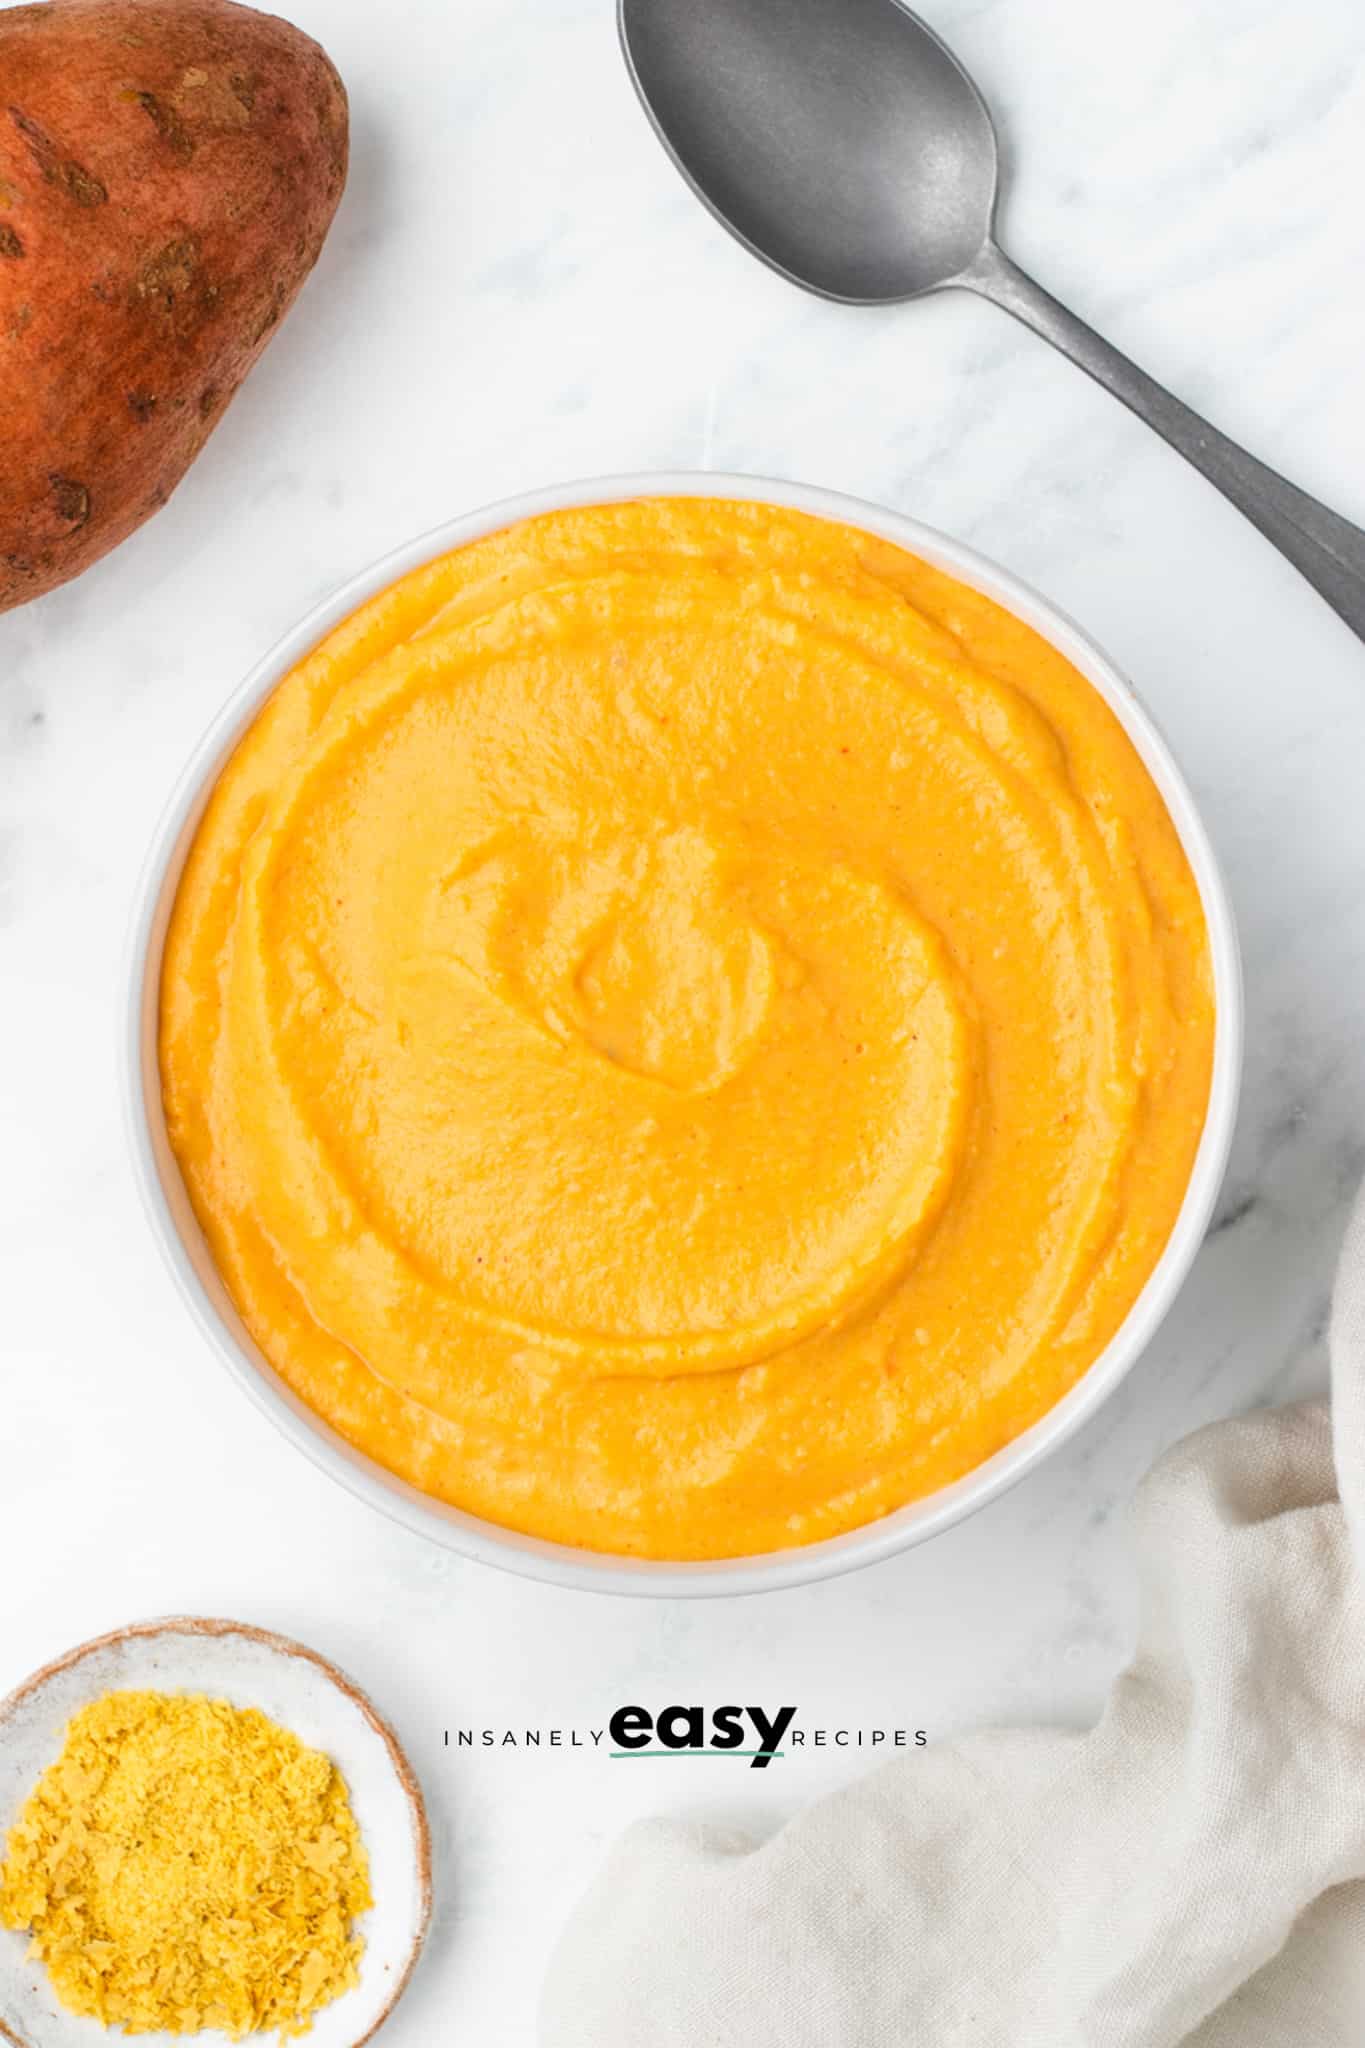 top view photo of sweet potato sauce in a white bowl with a spoon and a sweet potato above it and a white kitchen towel and small white bowl of turmeric below it